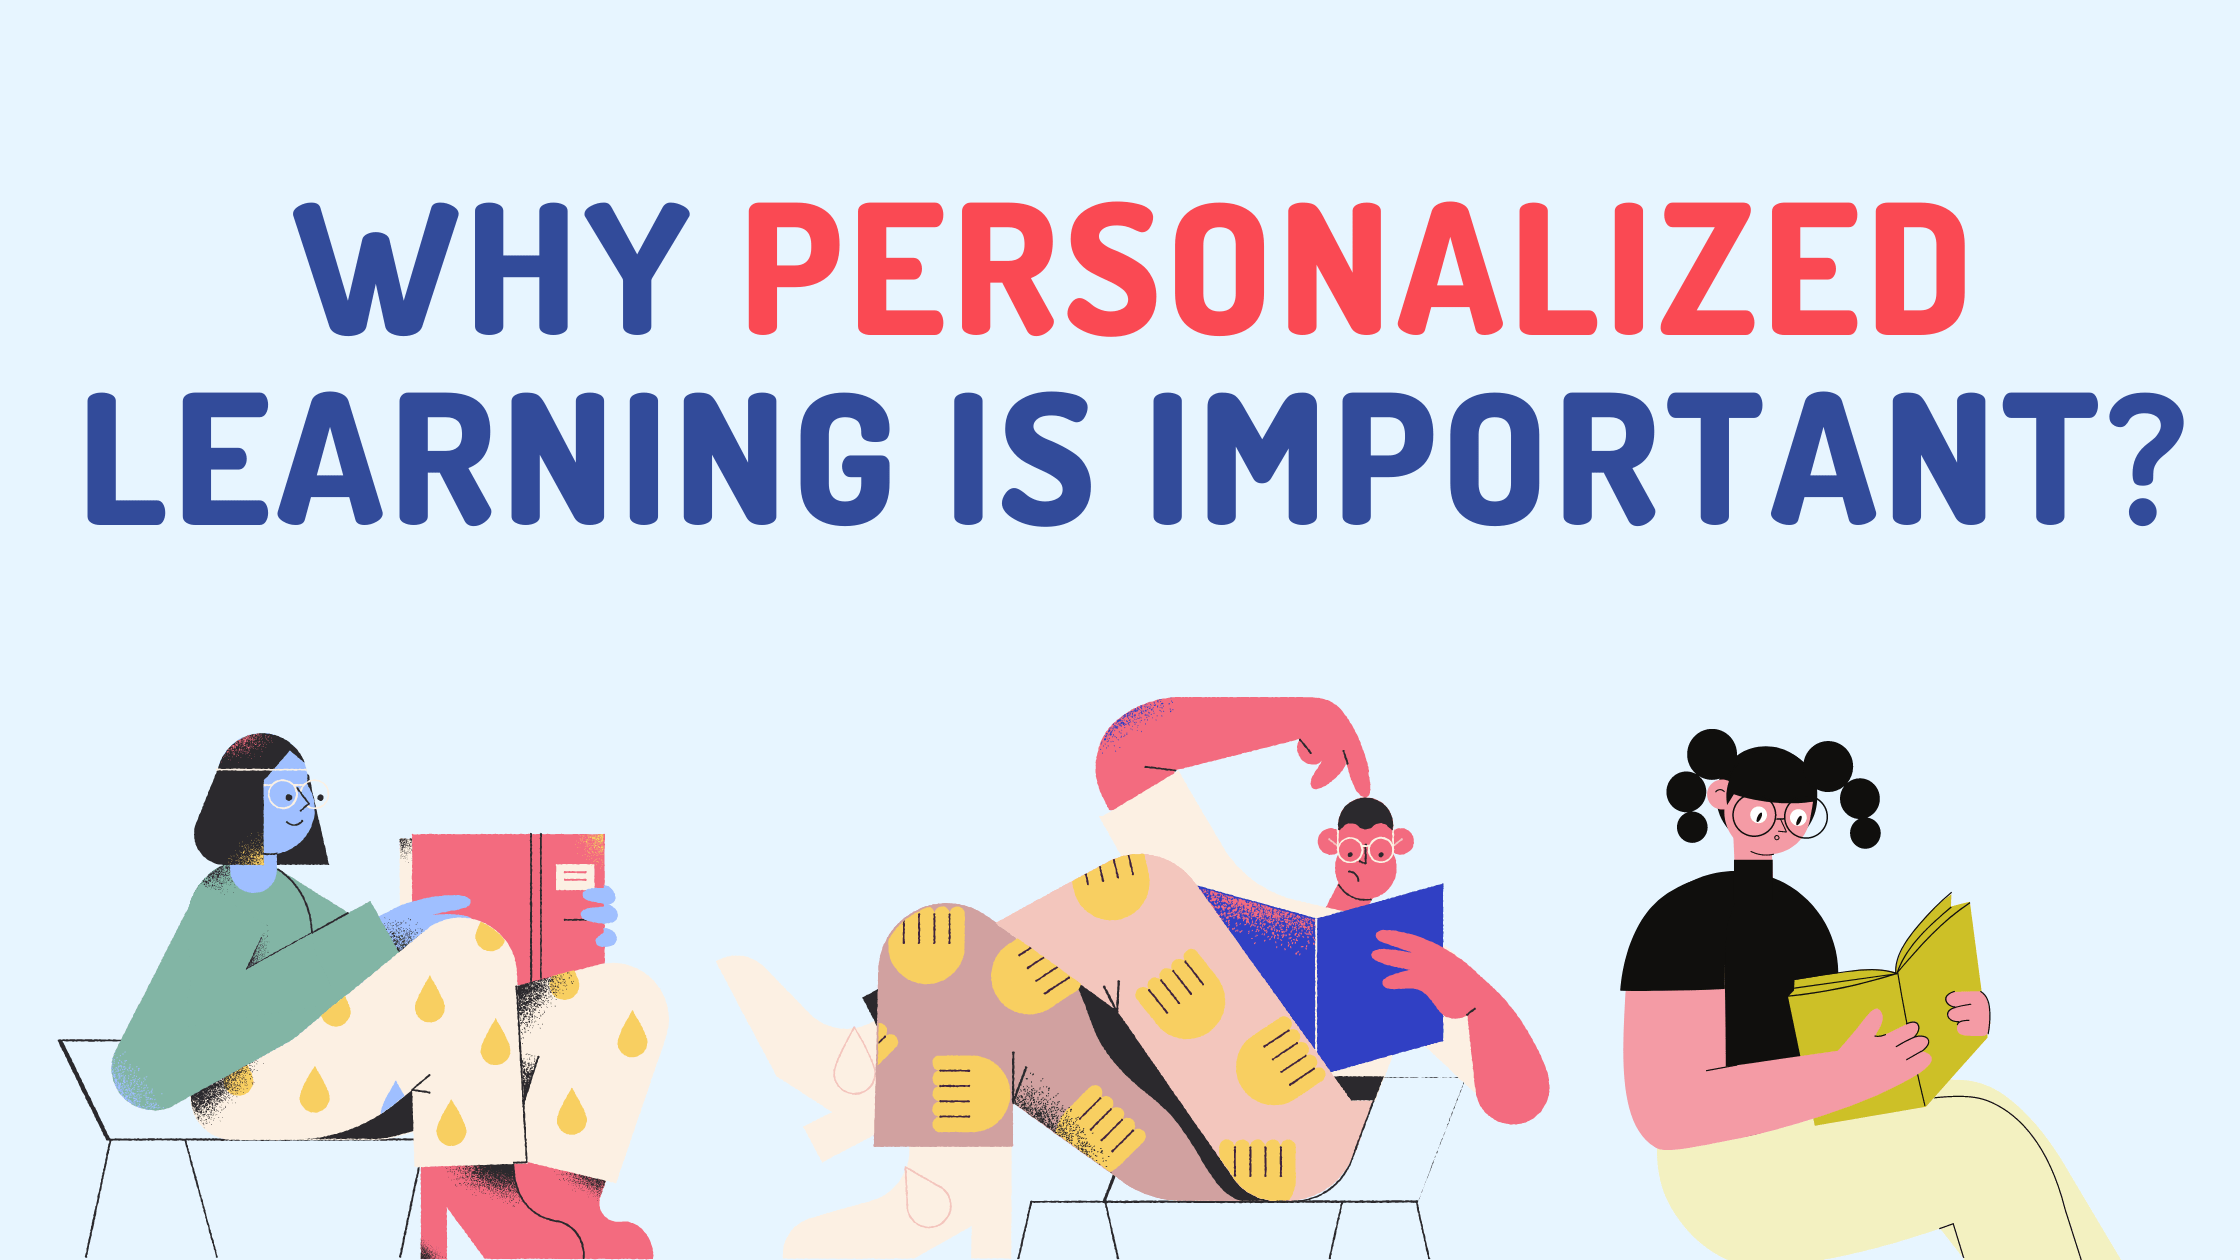 Why Personalized Learning is Important for GRE?